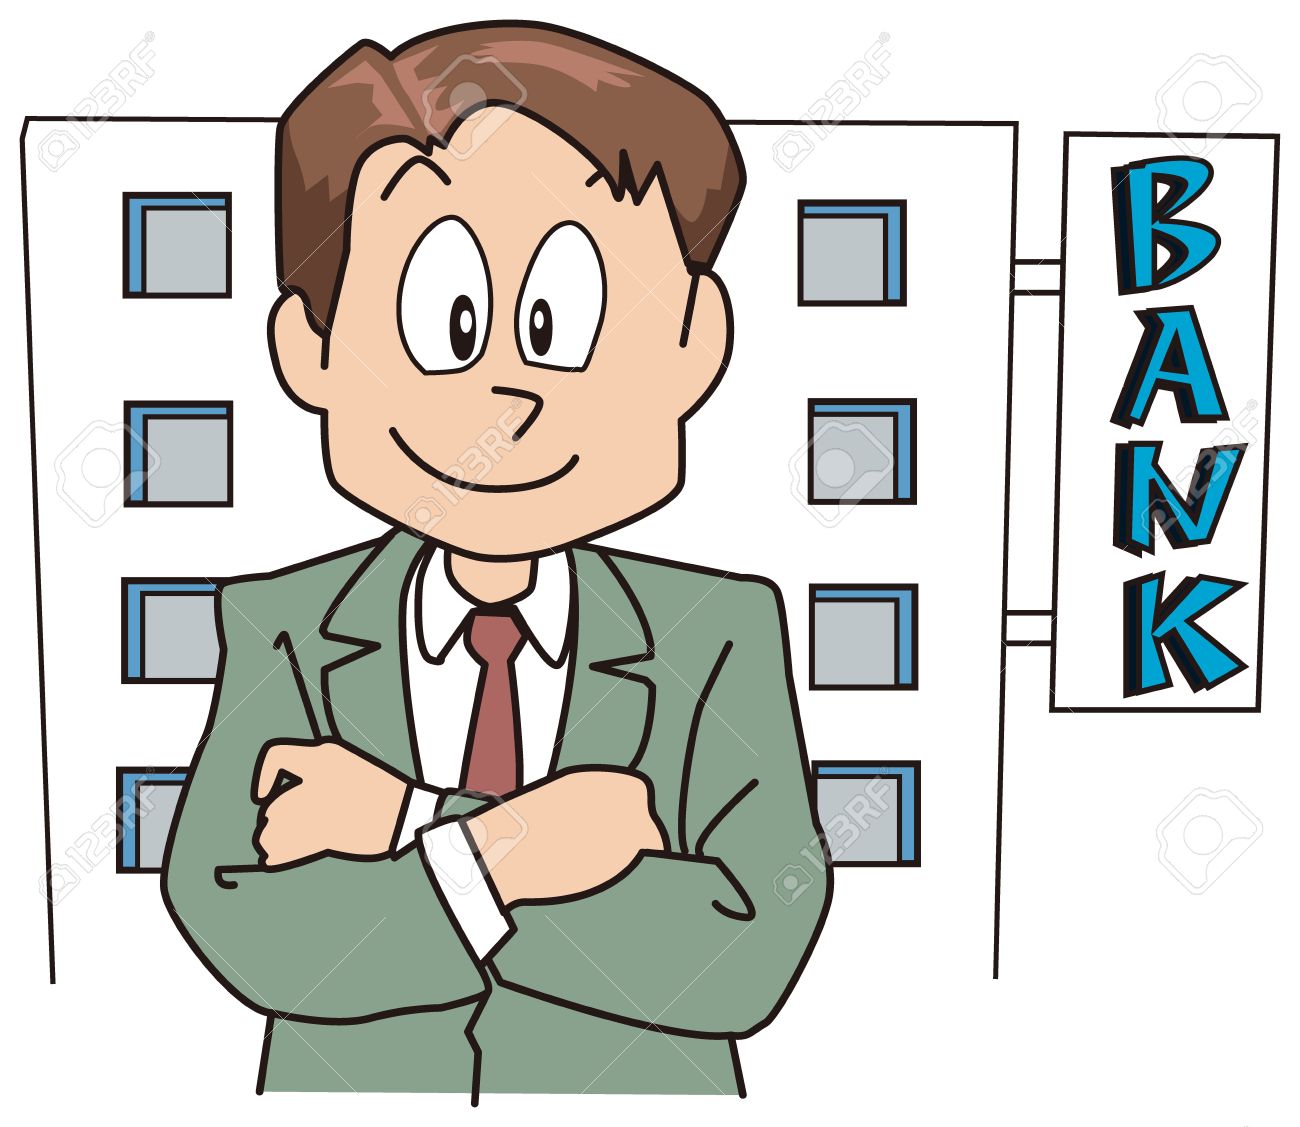 manager clipart bank